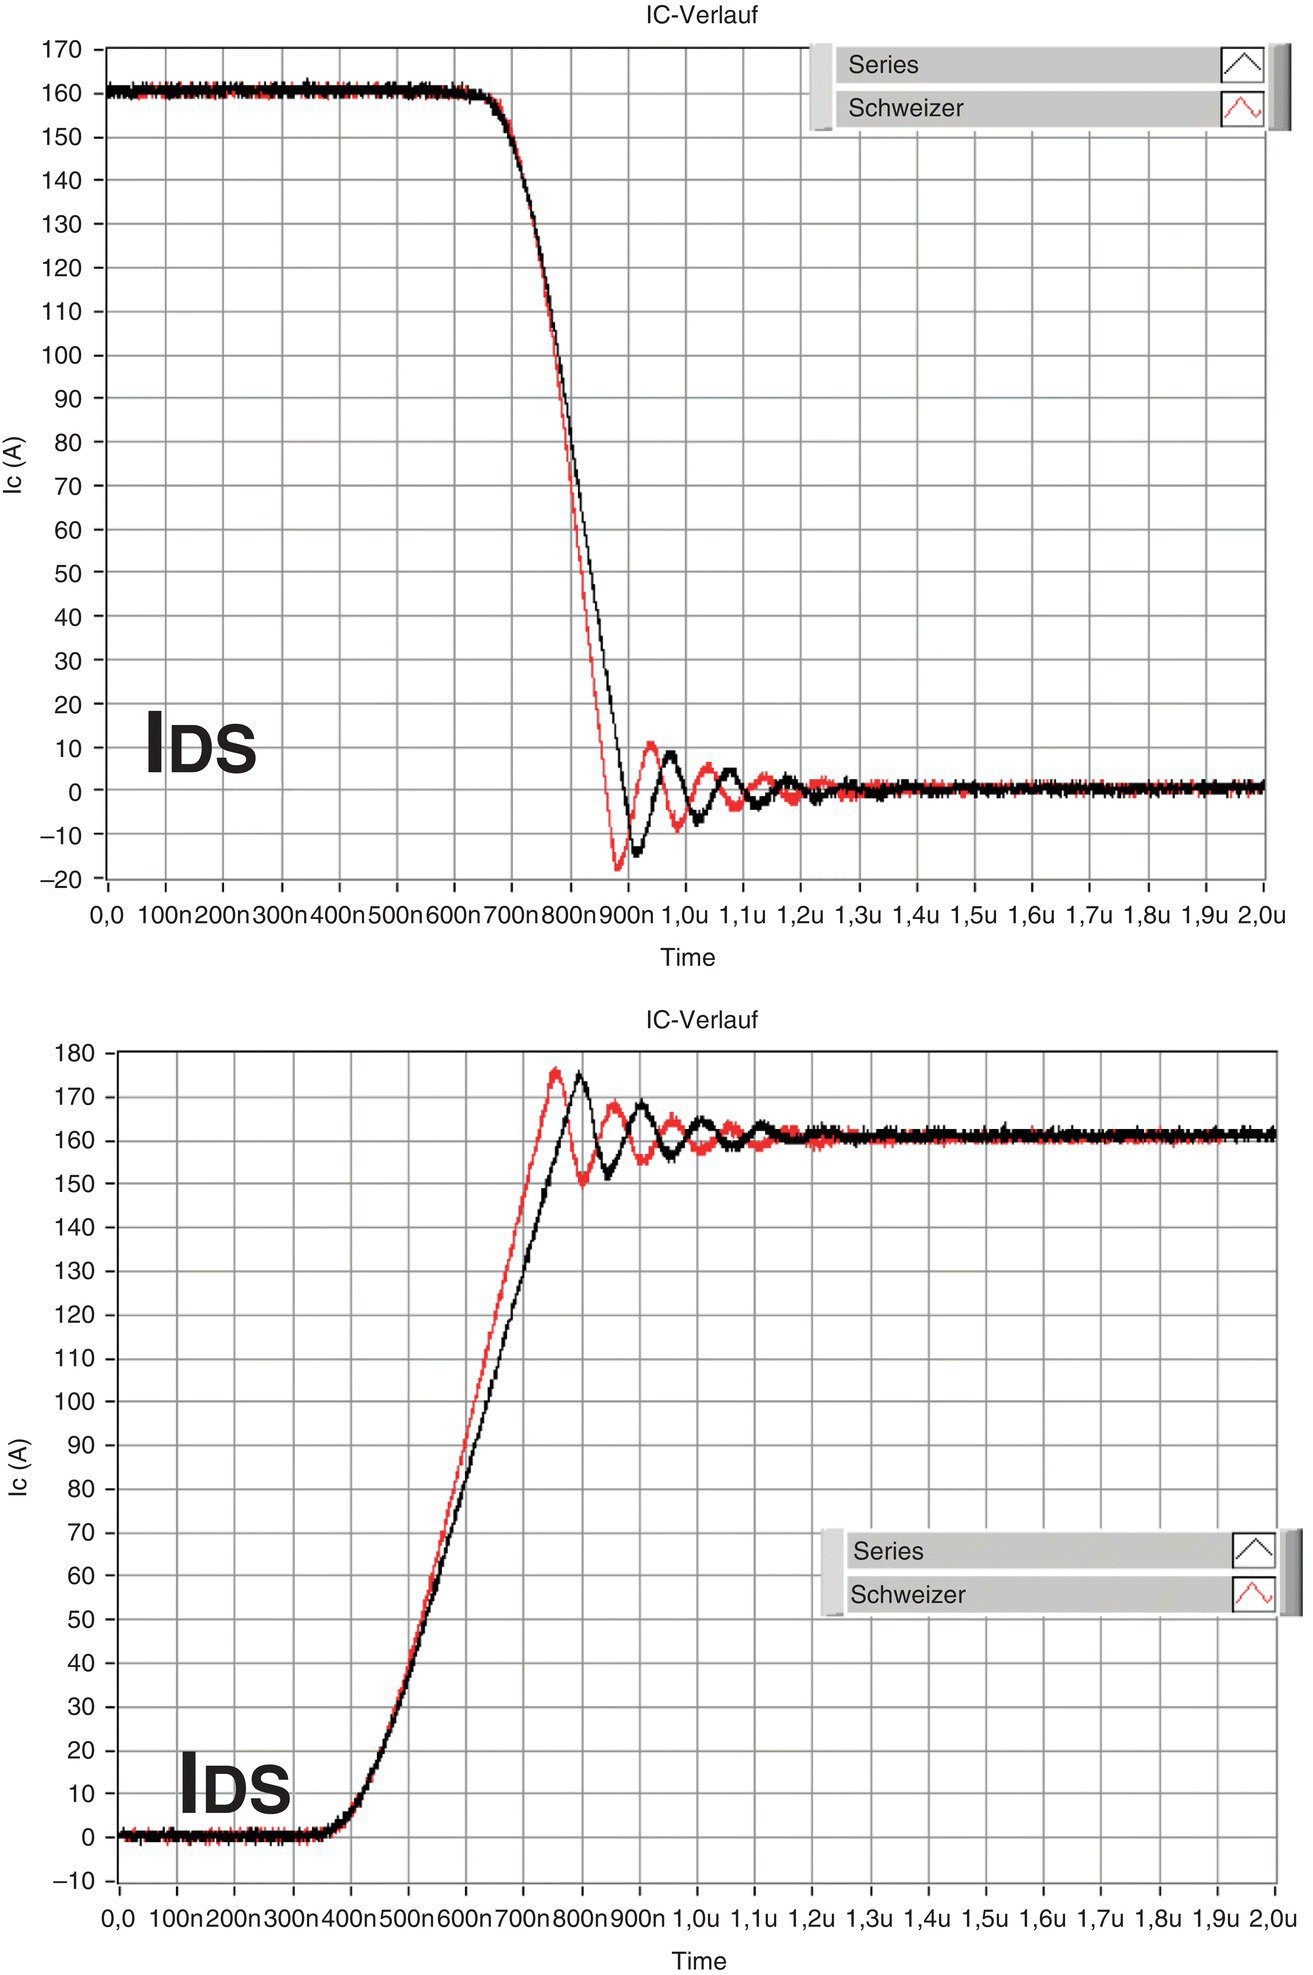 Graphs of Ic (A) vs. time displaying almost coinciding descending (top) and ascending (bottom) curves for series and Schweizer.